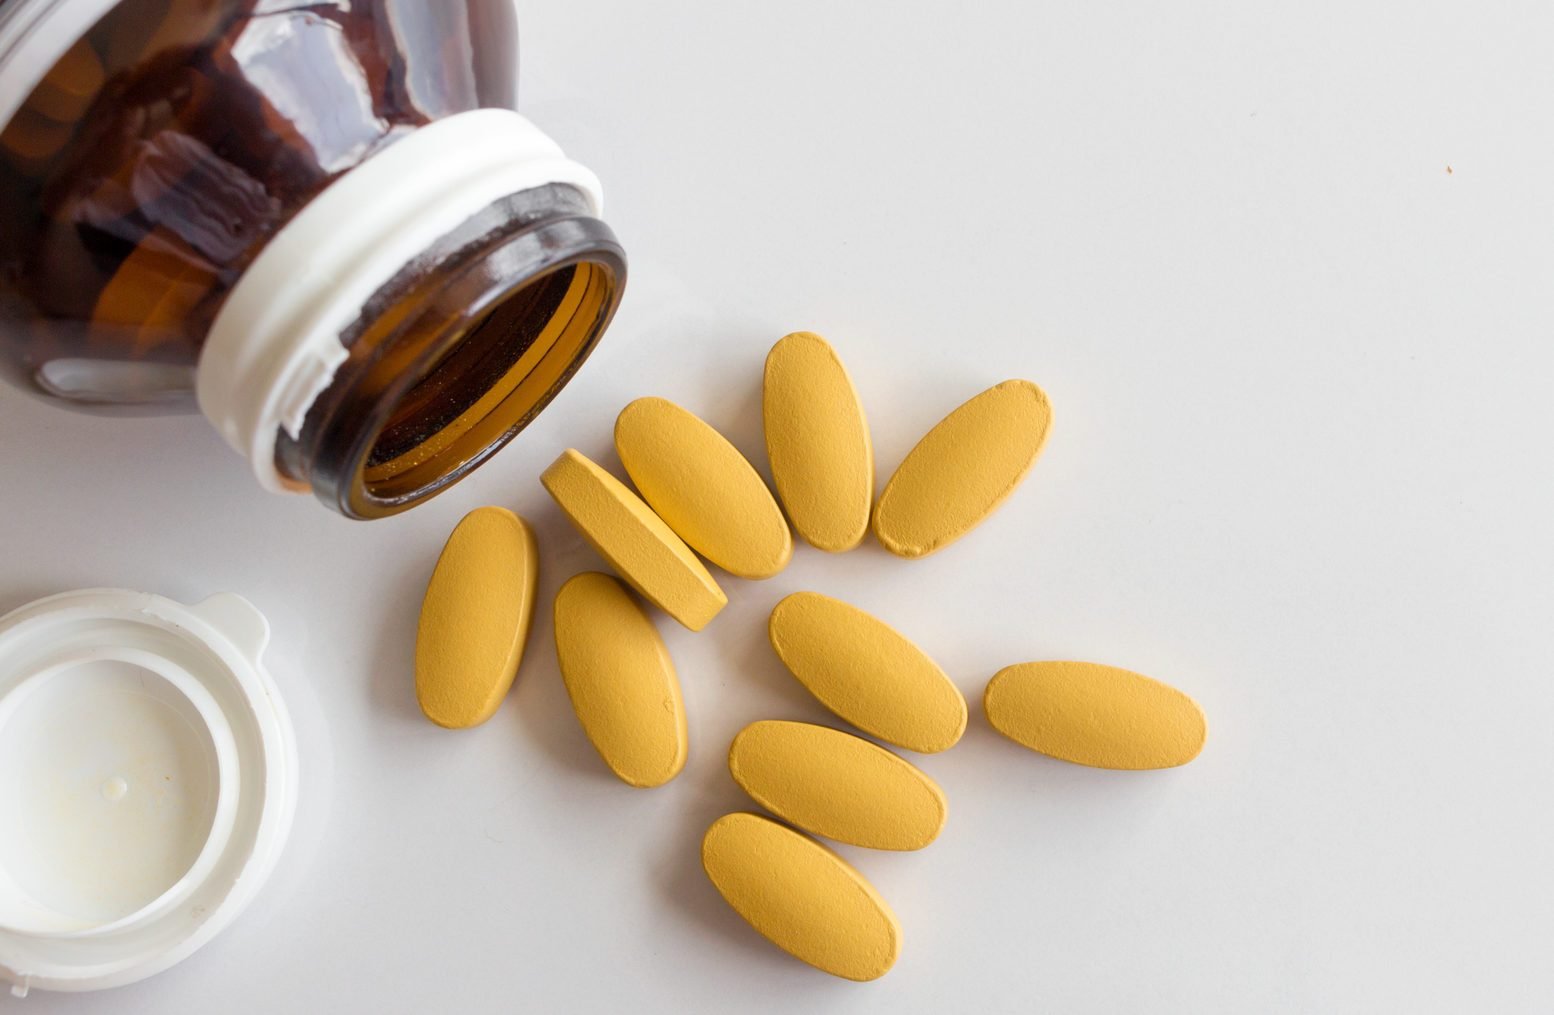 New Study: A Daily Multivitamin Could Slow Brain Aging by Almost 60%